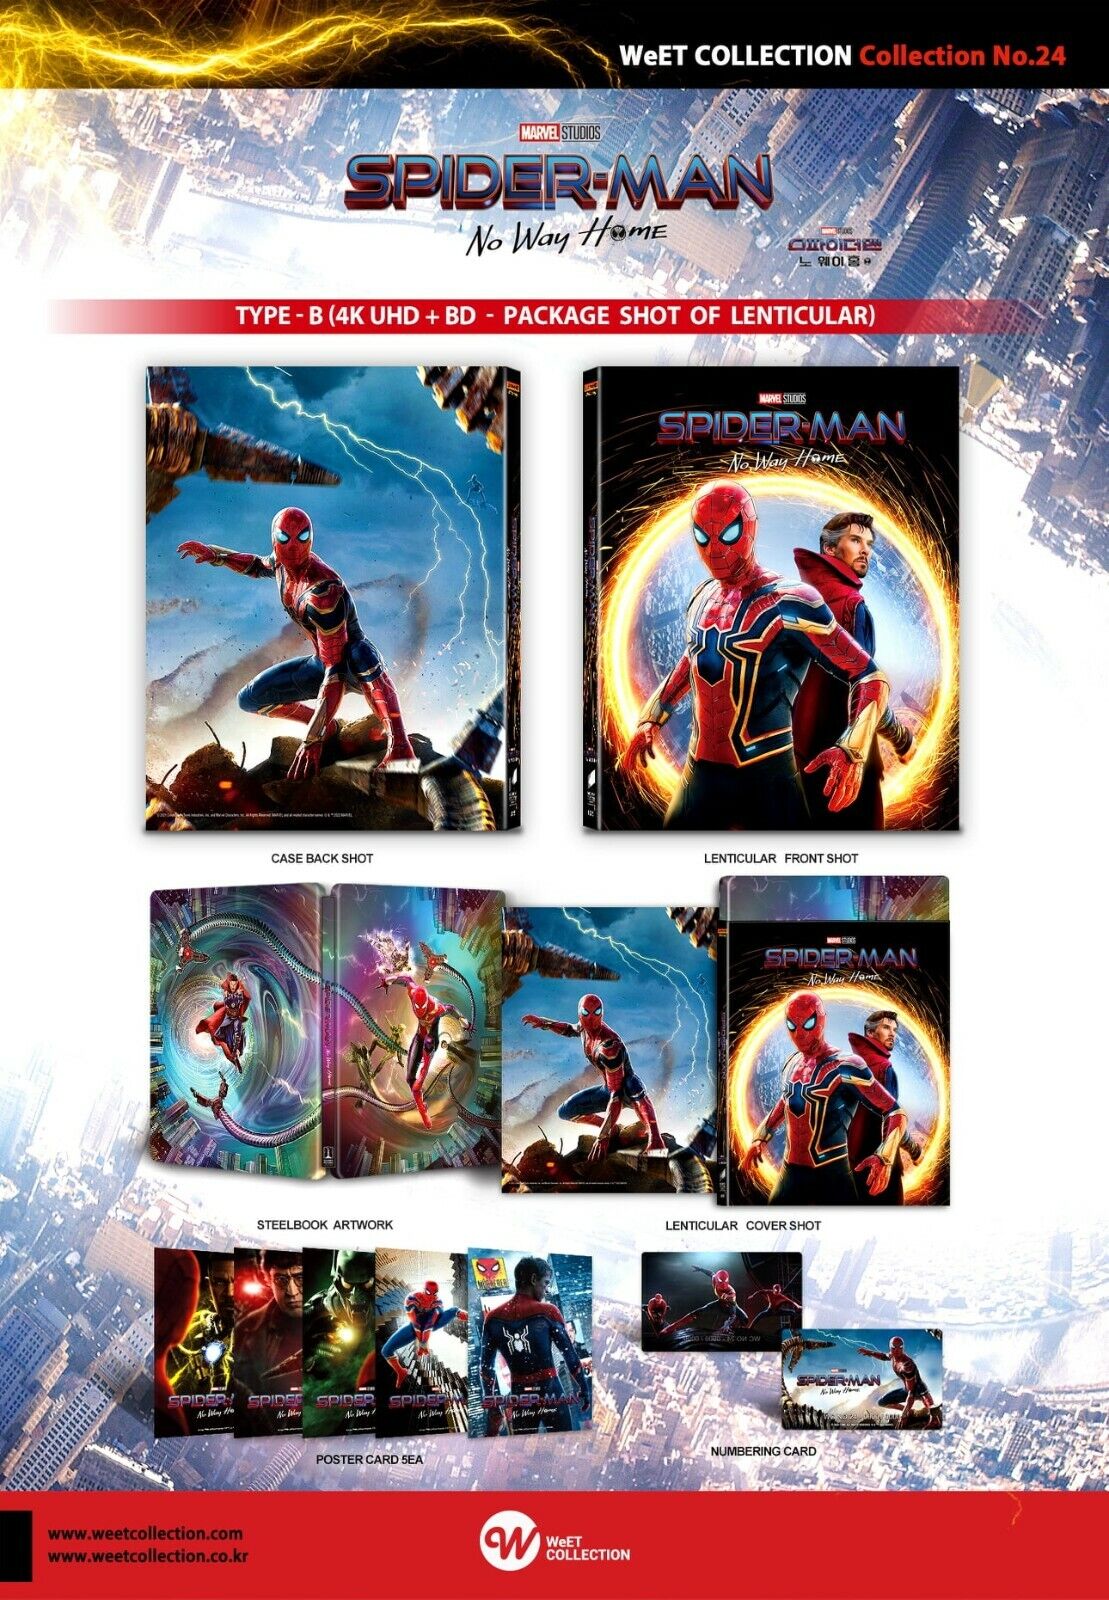 Spider-Man: No Way Home 4K Blu-ray Steelbook WeET Collection Collection #24 One Click Set